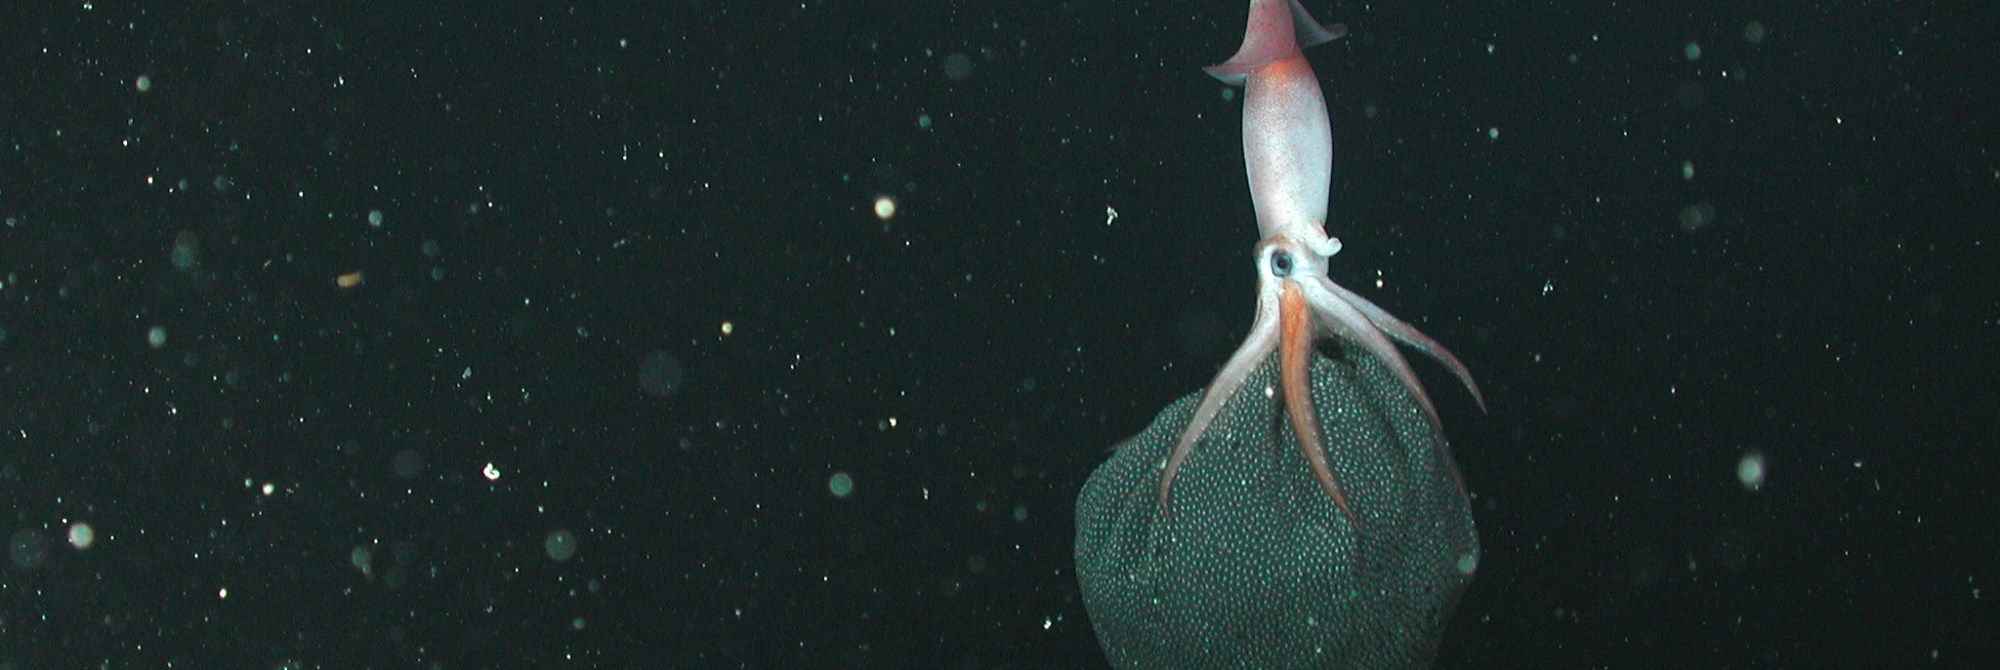 a squid in the deep dark ocean with a large black blob of eggs beneath its tentacles